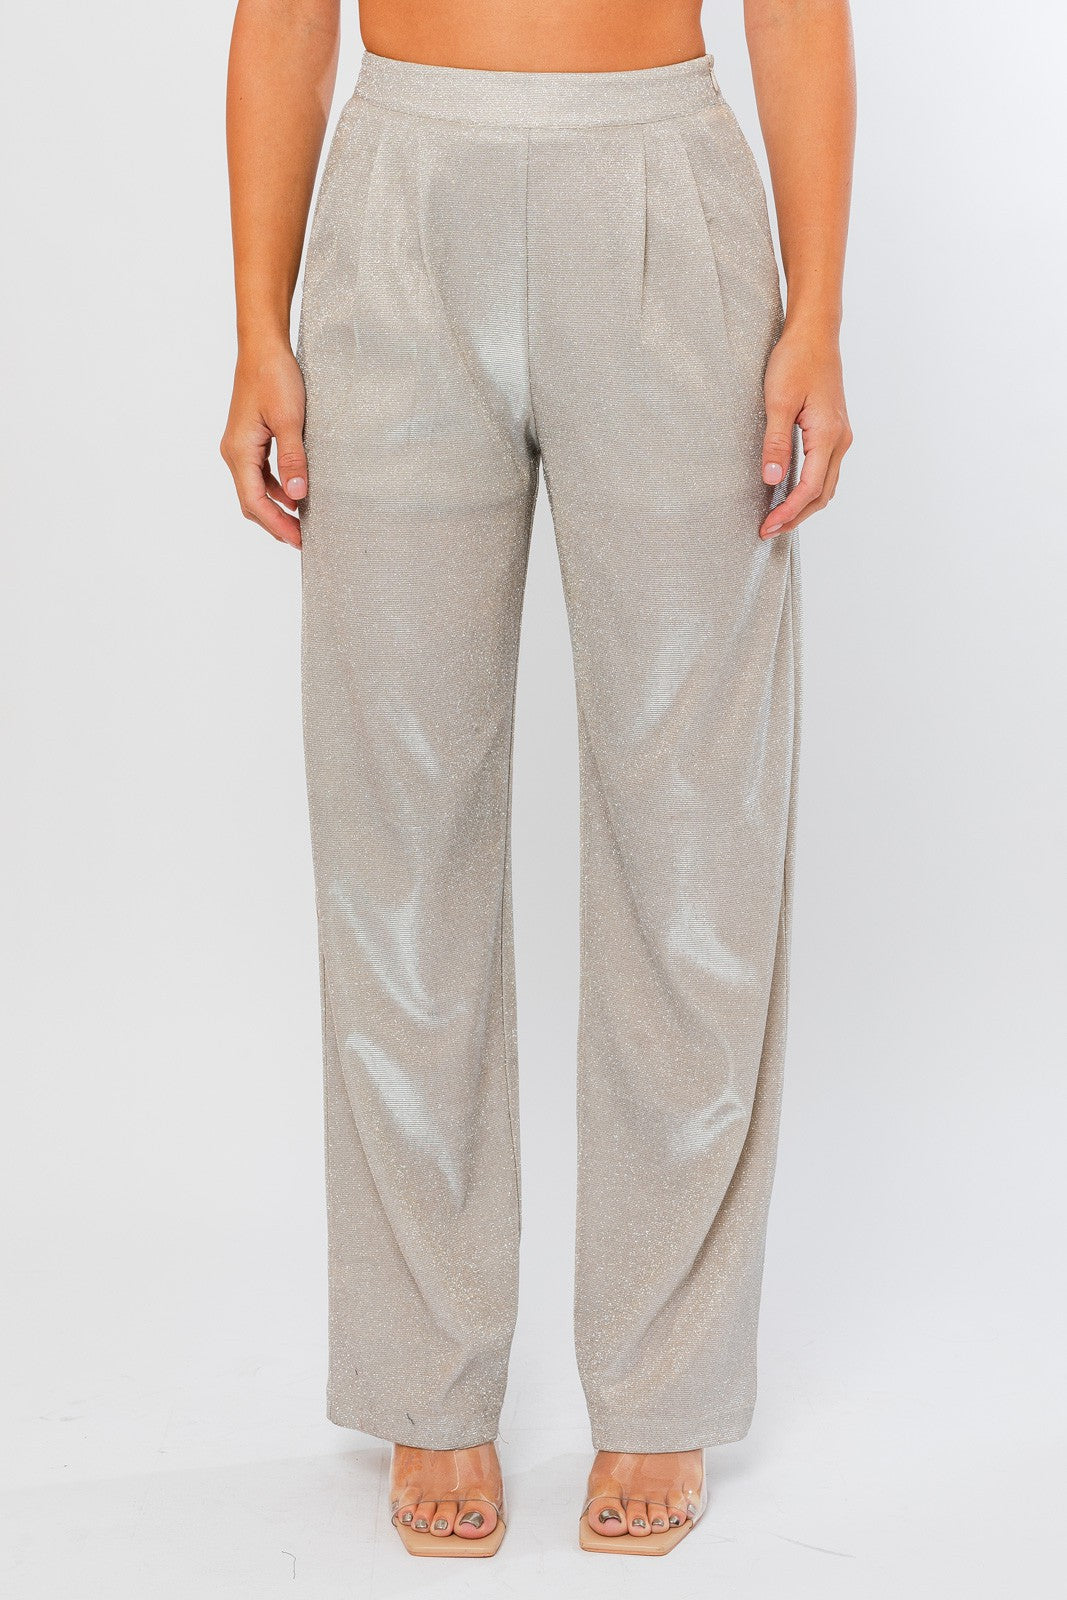 Party Girl Trousers - Silver Sparkle